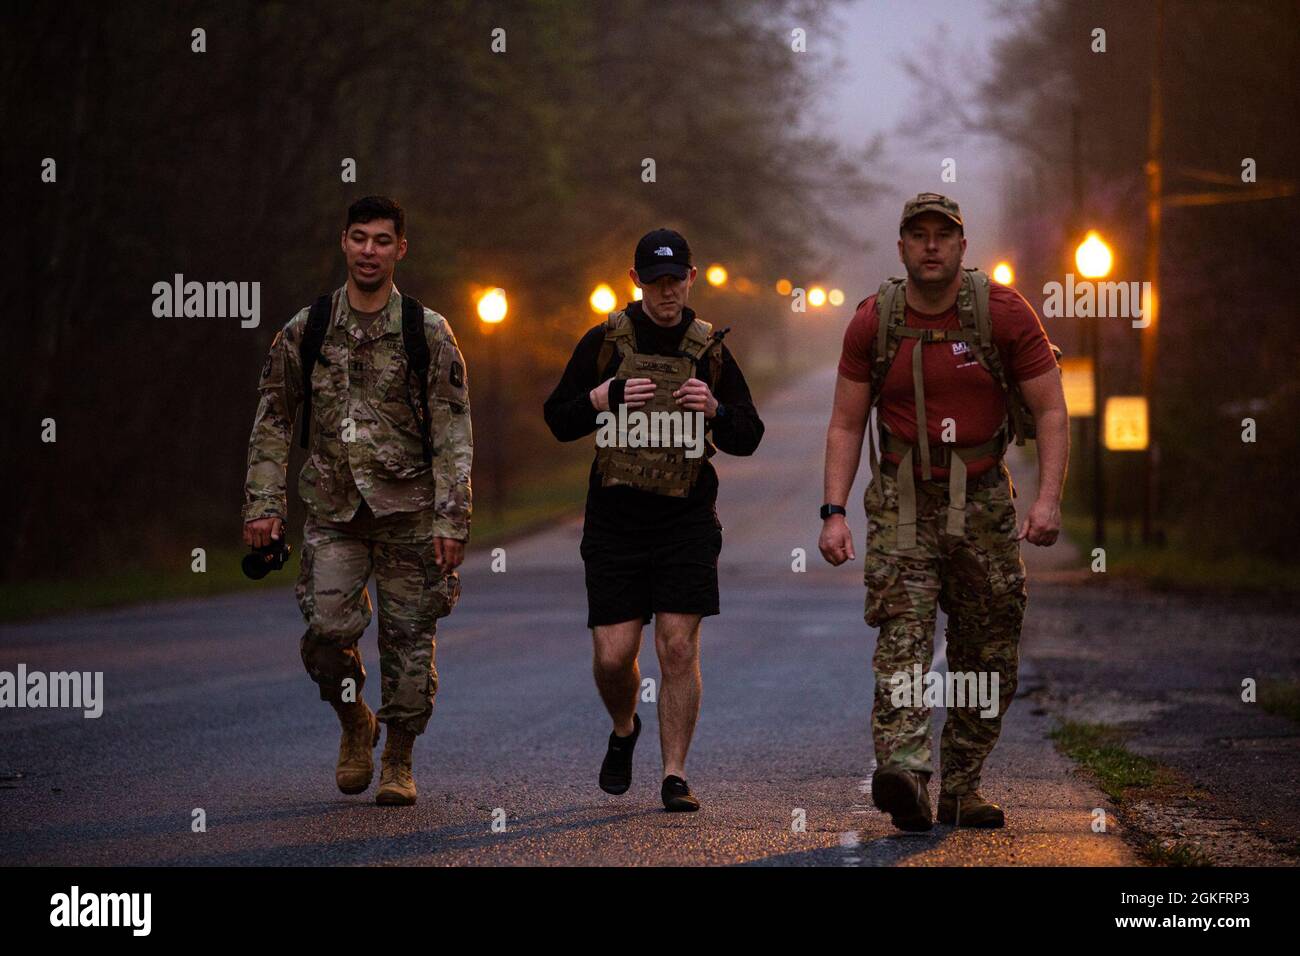 U.S. Army Capt. Phillip Lee, Staff Sgt. Brandon Franklin and Spc. Christopher Cameron conduct the 26-mile Bataan Memorial Death March on Fort George G. Meade, Maryland, April 10, 2021. The Bataan Death March took place in April 1942, where American and Filipino prisoners of war were forced to walk 66 miles. Stock Photo